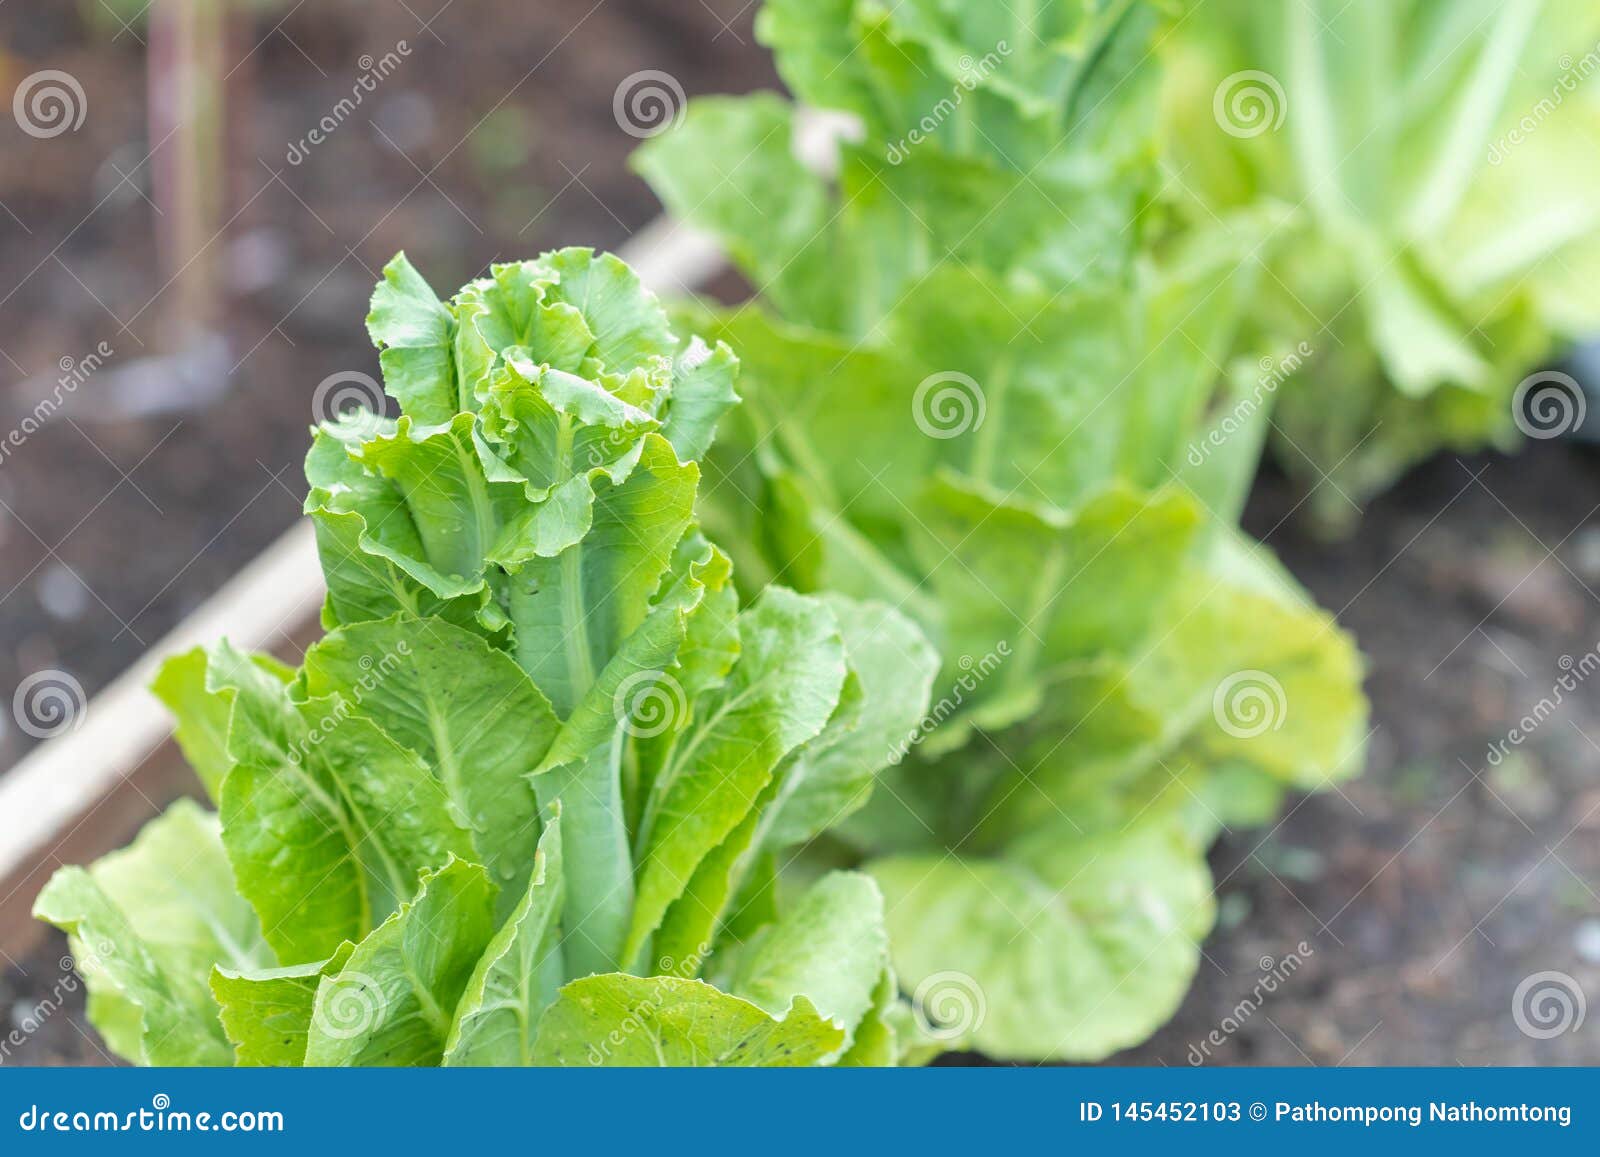 Green Oak Lettuce at the Garden Stock Image - Image of health, crop ...